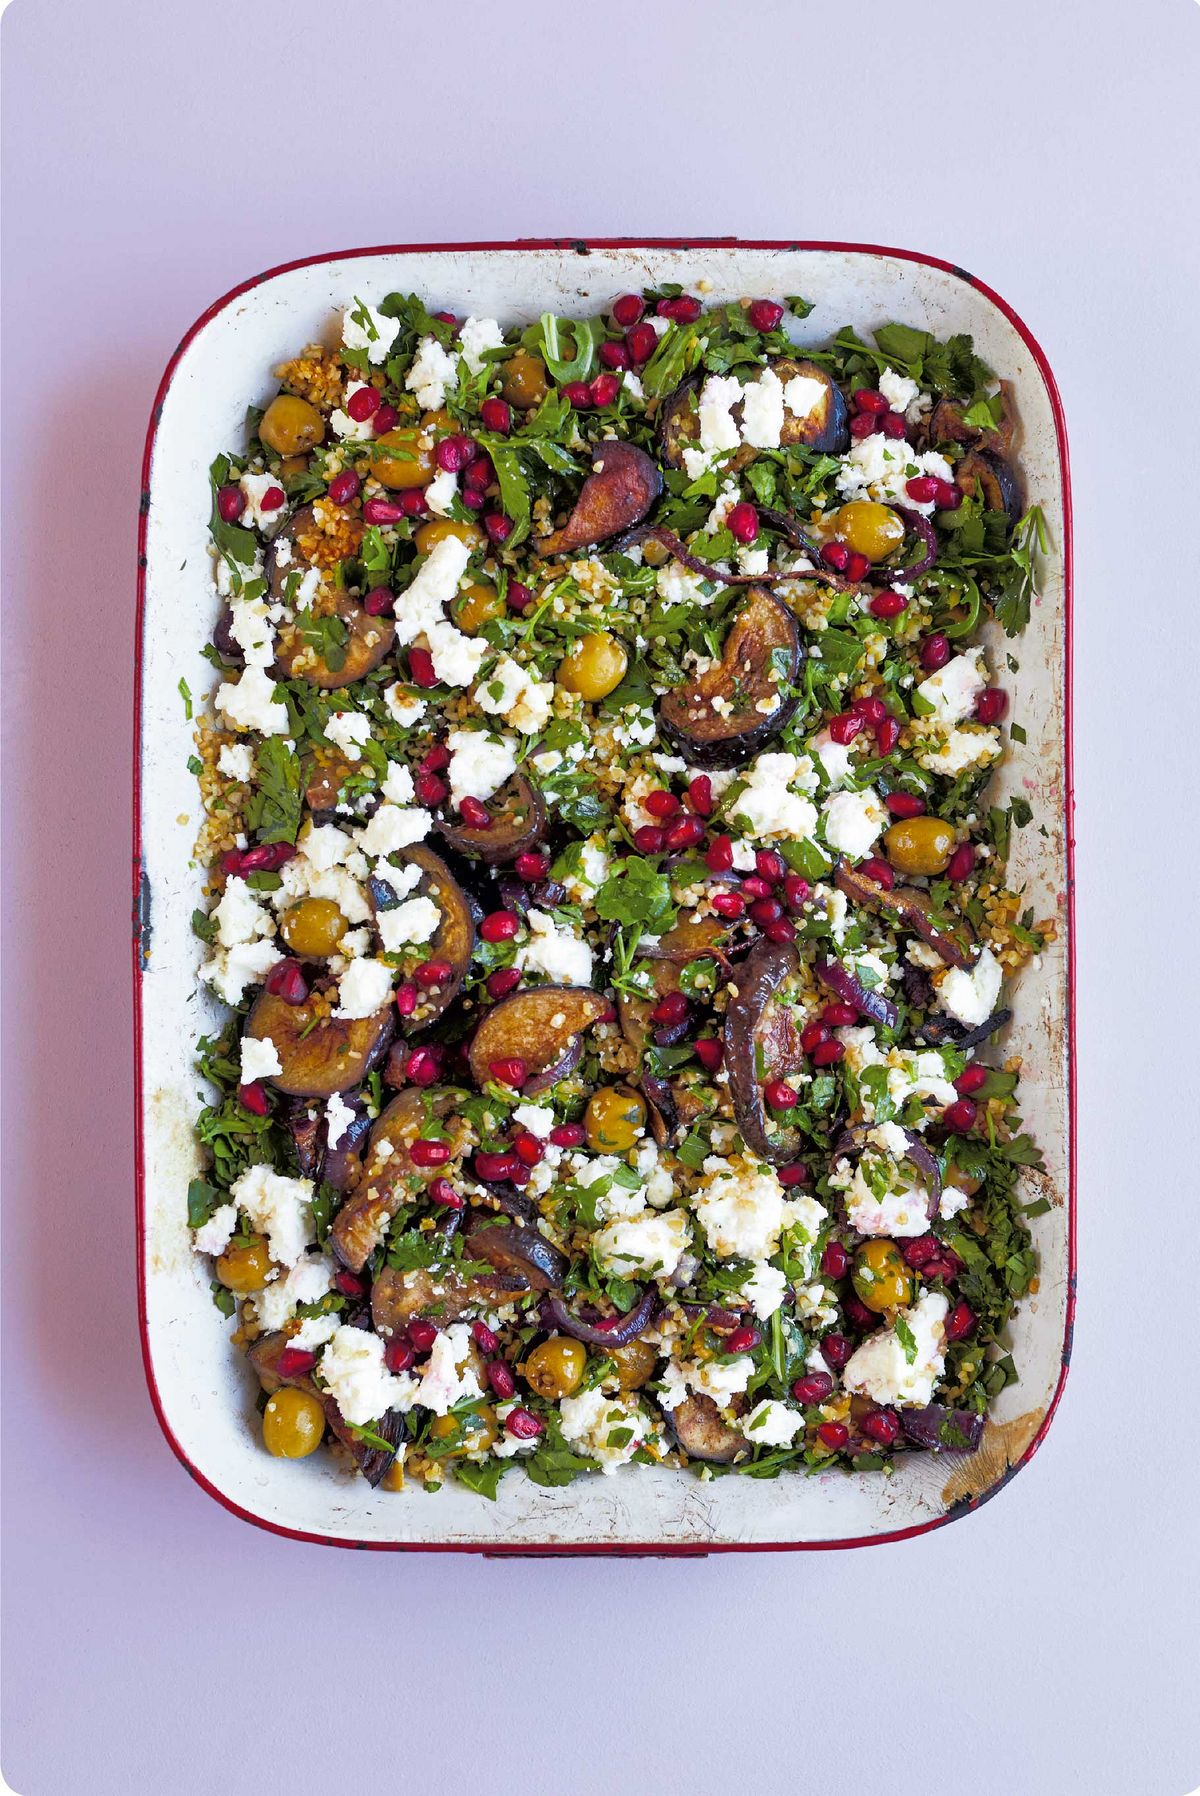 Cinnamon-spiced Aubergines with Feta Cheese, Olives and Herbed Bulgur Wheat